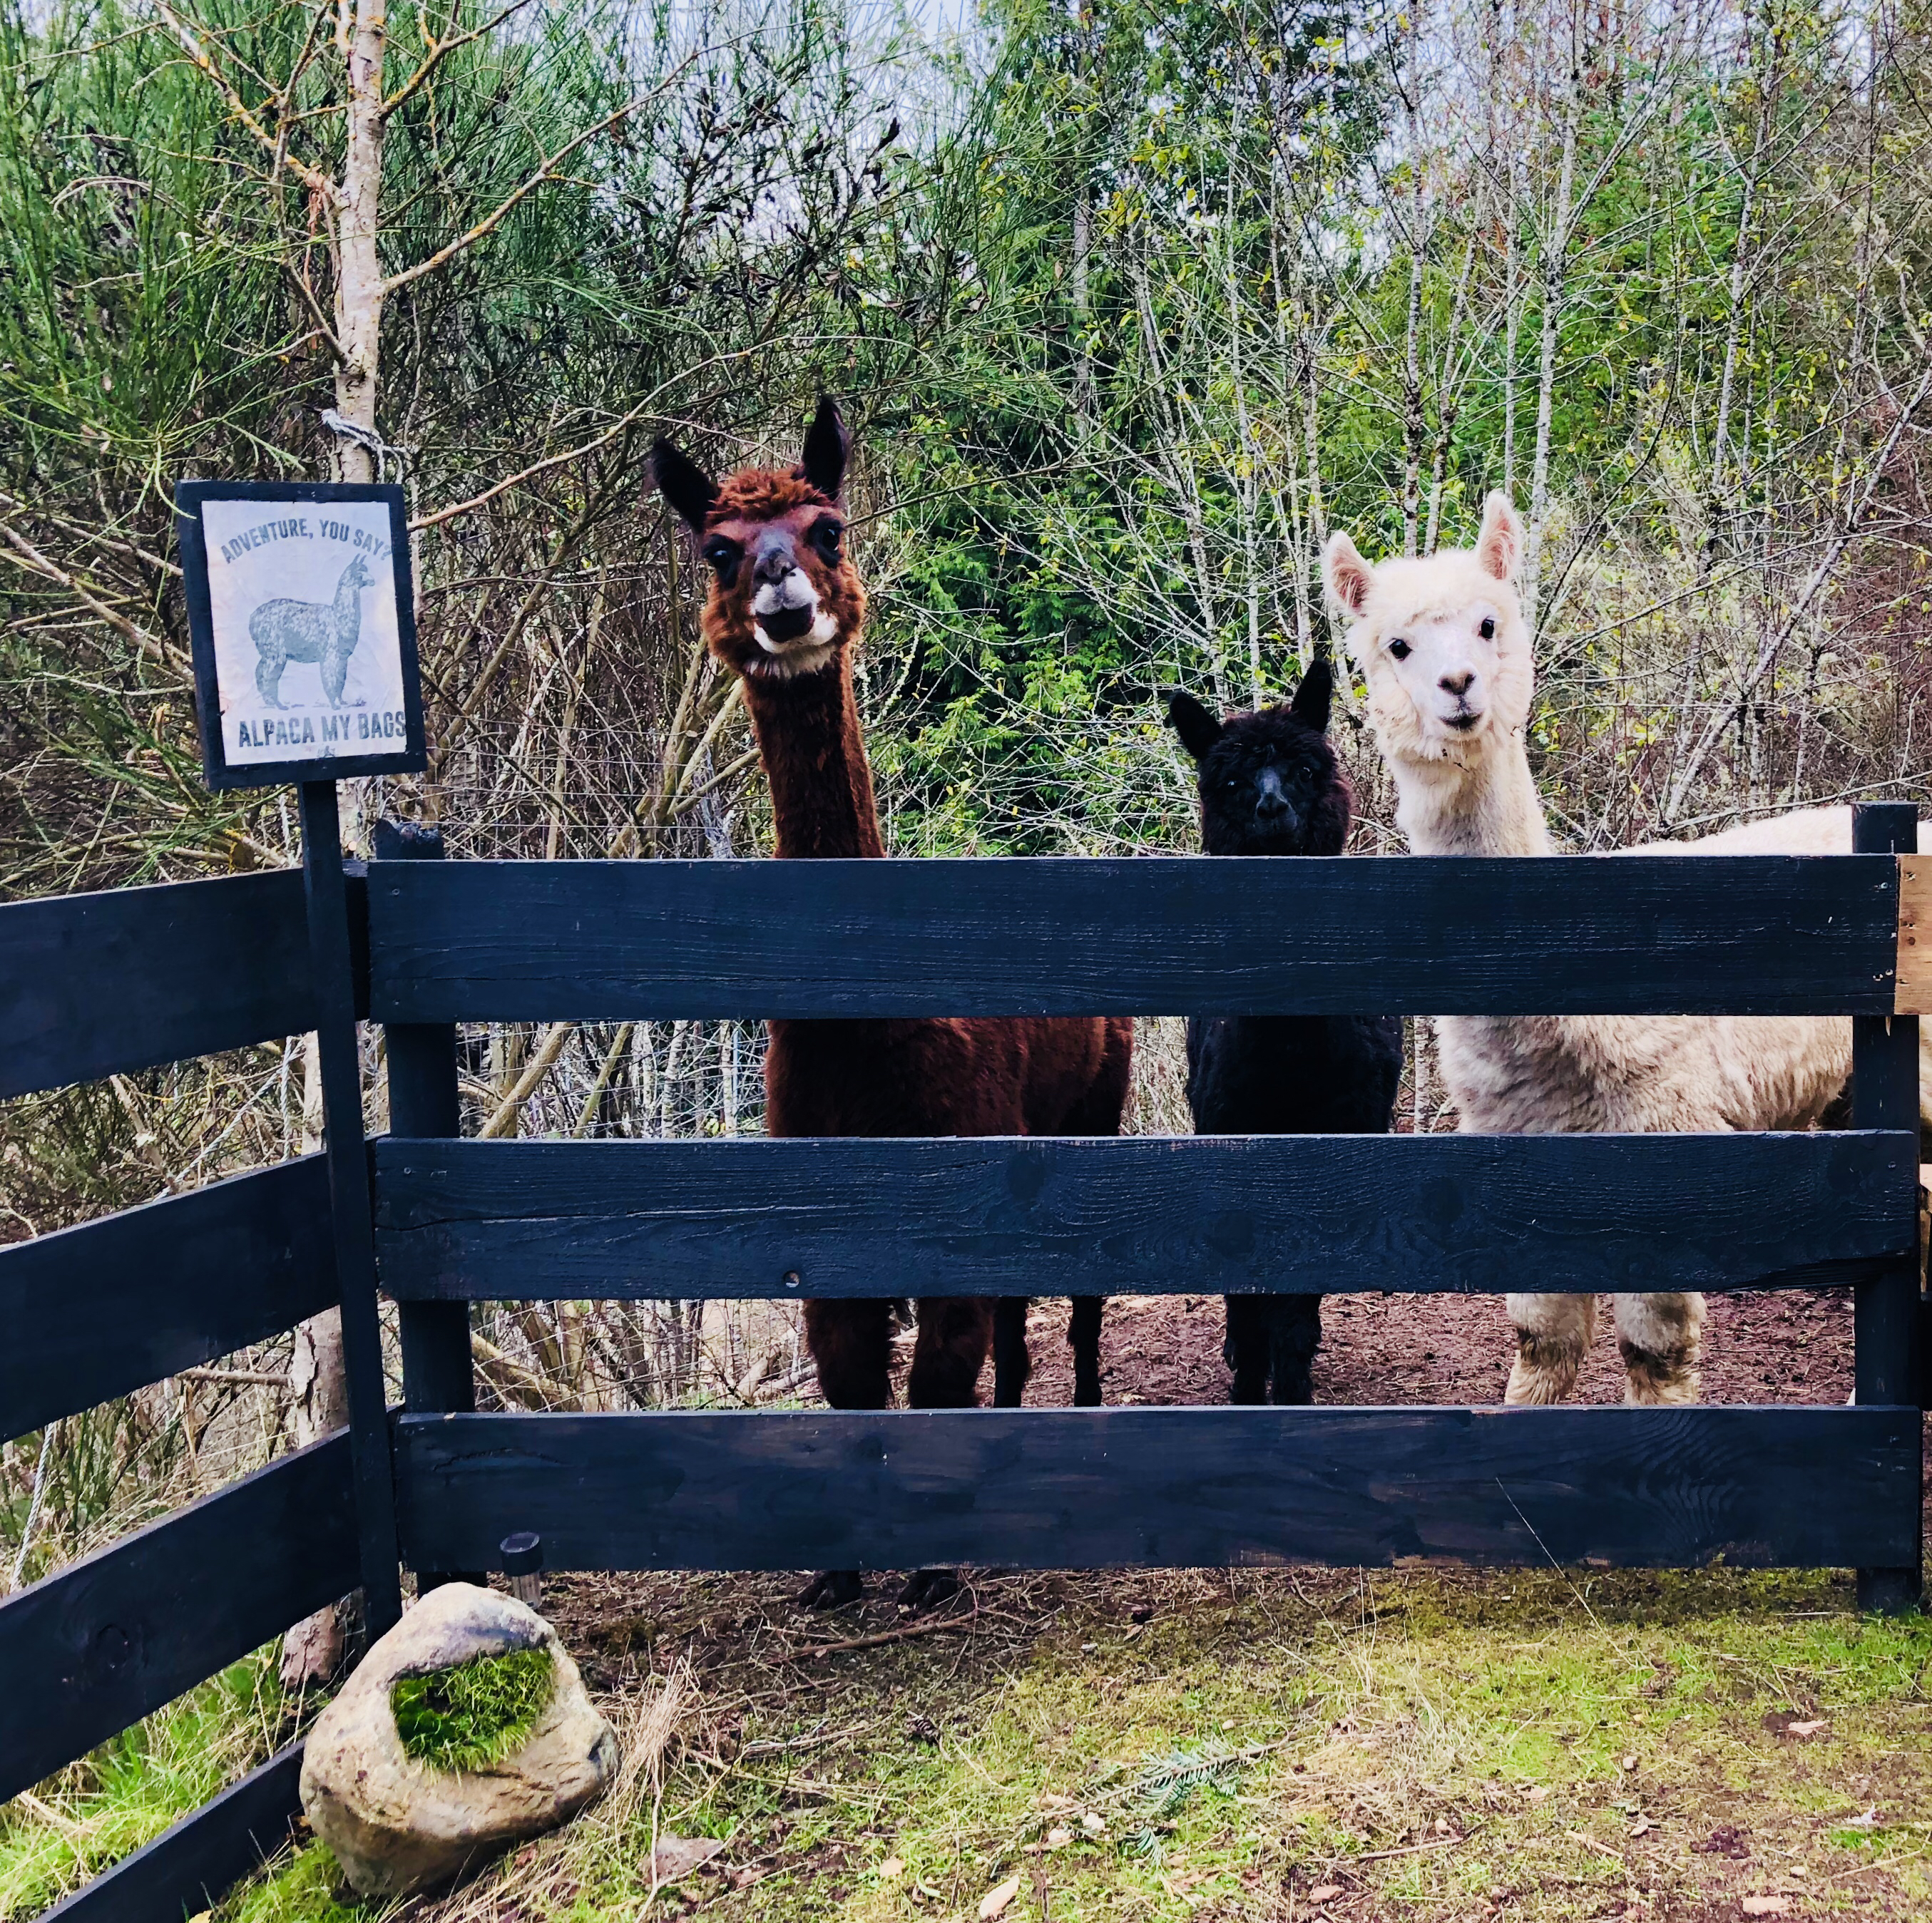 Beau Mountain Ocean View Cottage - Feed Alpacas - Cottages for Rent in  Sooke, British Columbia, Canada - Airbnb